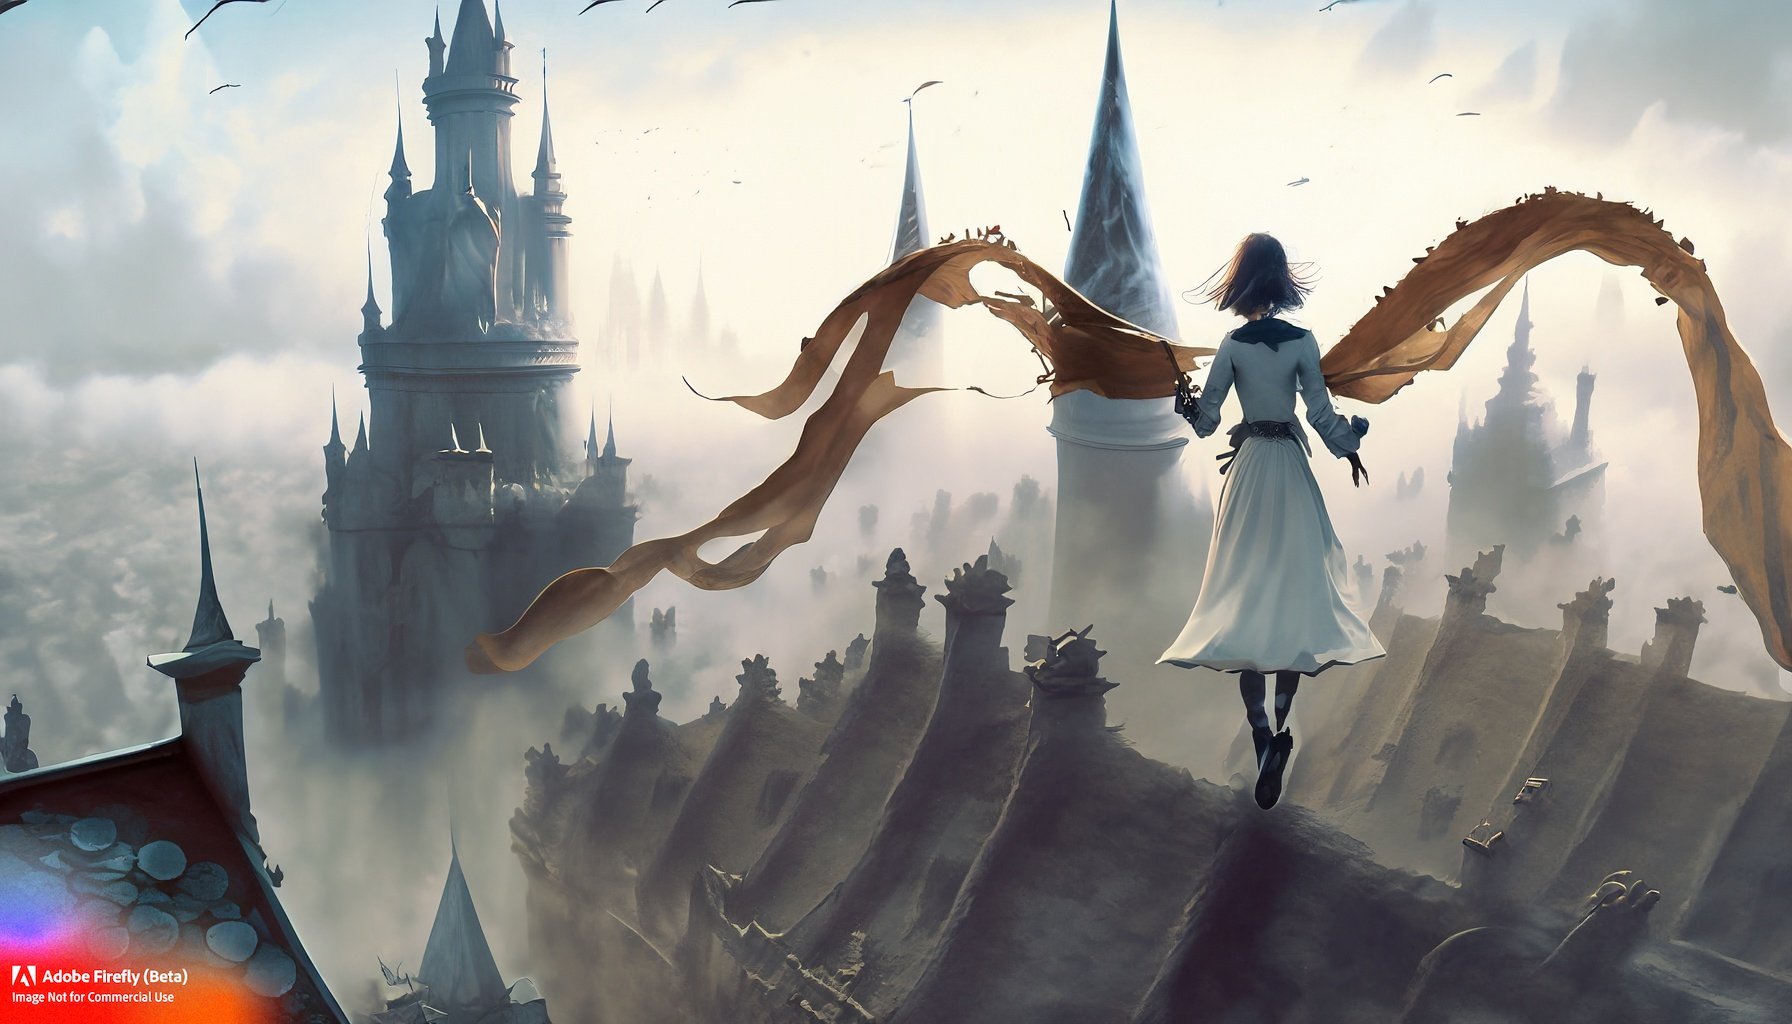 Firefly_mist+and fog, person in a cape of ribbons flying over ancient city rooftops, coins, a castle with many spires_art,wide_angle,fantasy_86265.jpg